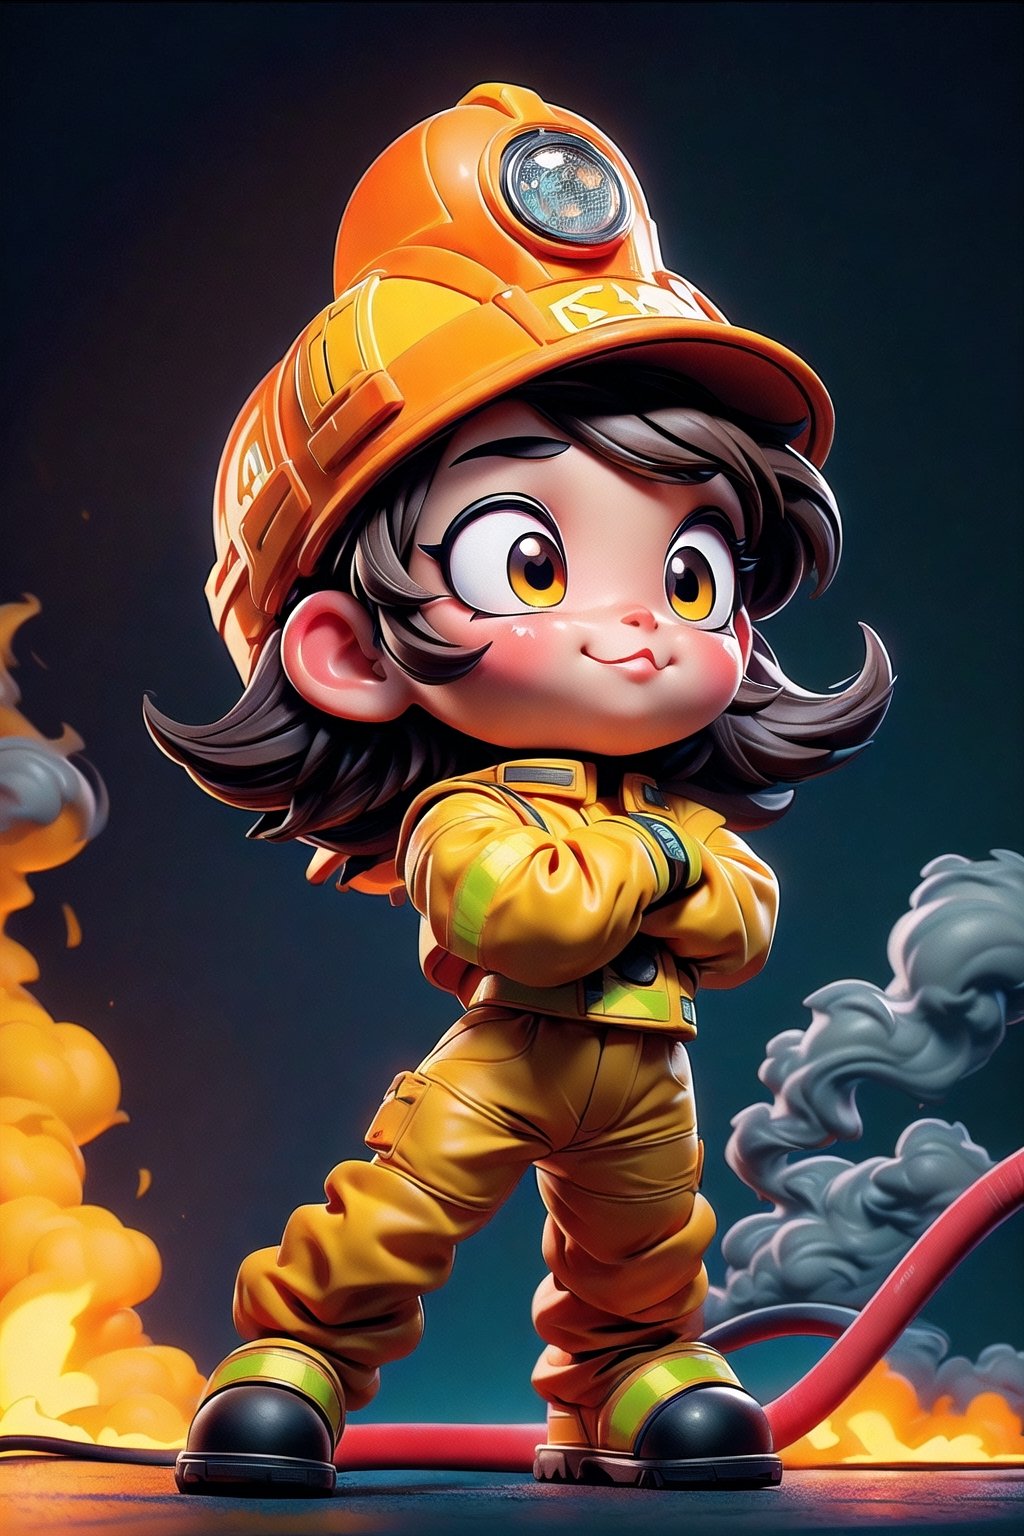 (detailed beautiful eyes and detailed face, masterpiece side light, masterpiece, best quality, detailed, high resolution illustration), ((2cute cartoon fireman back to back posing)), (future sense fireman:1.36), (short brown hair:1.38), (orange and yellow uniform:1.4), protection gear, armor, ((extra large helmet)), beautiful big eyes, fire scene background, ultra blur background, holding fire hose, front_view,  ((extra big head:1.5)), ((extra short body:1.5)), ((cute pose:1.4)), ((heavy dust and smoke environment)), dynamic light on body, ((front view)),(full body), urban techwear,C7b3rp0nkStyle,3DMM,l4tex4rmor,PD-802,mecha musume,halloweentech ,urban techwear